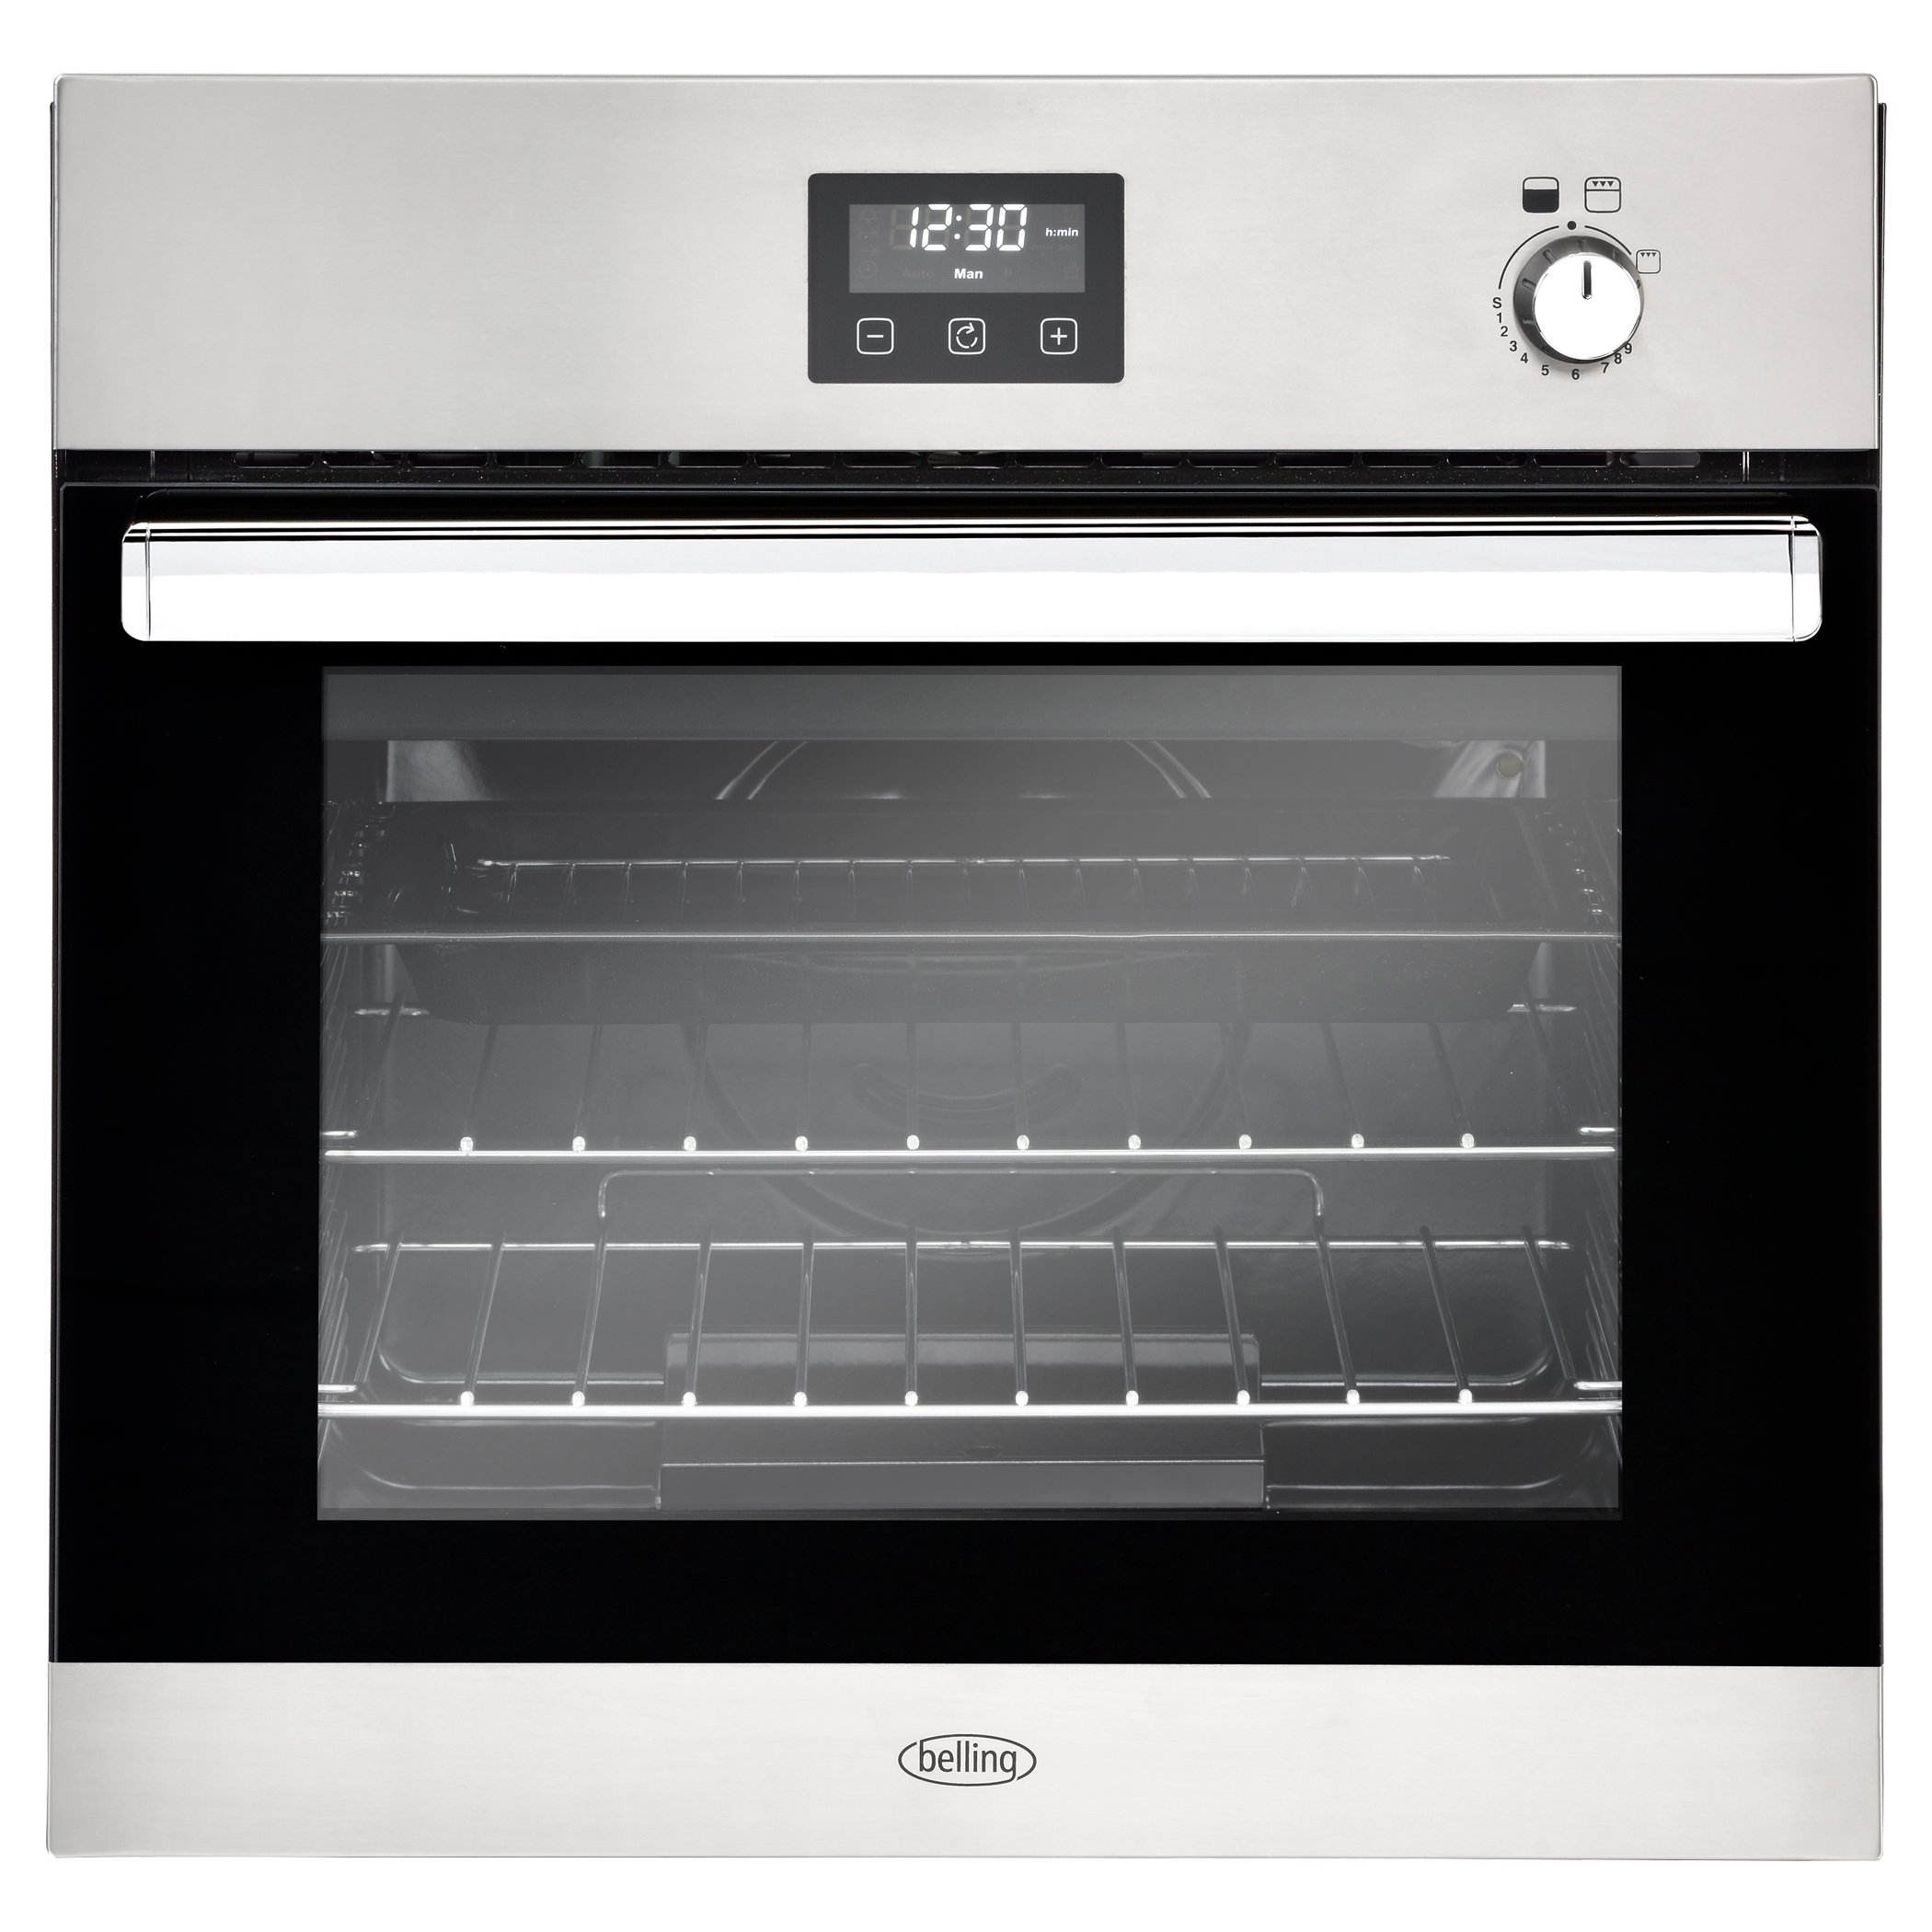 60cm built-in gas oven with 69L gross capacity and easy clean enamel. Additional features include cook to off timer, fixed rate grill and slow cook. A energy rating.